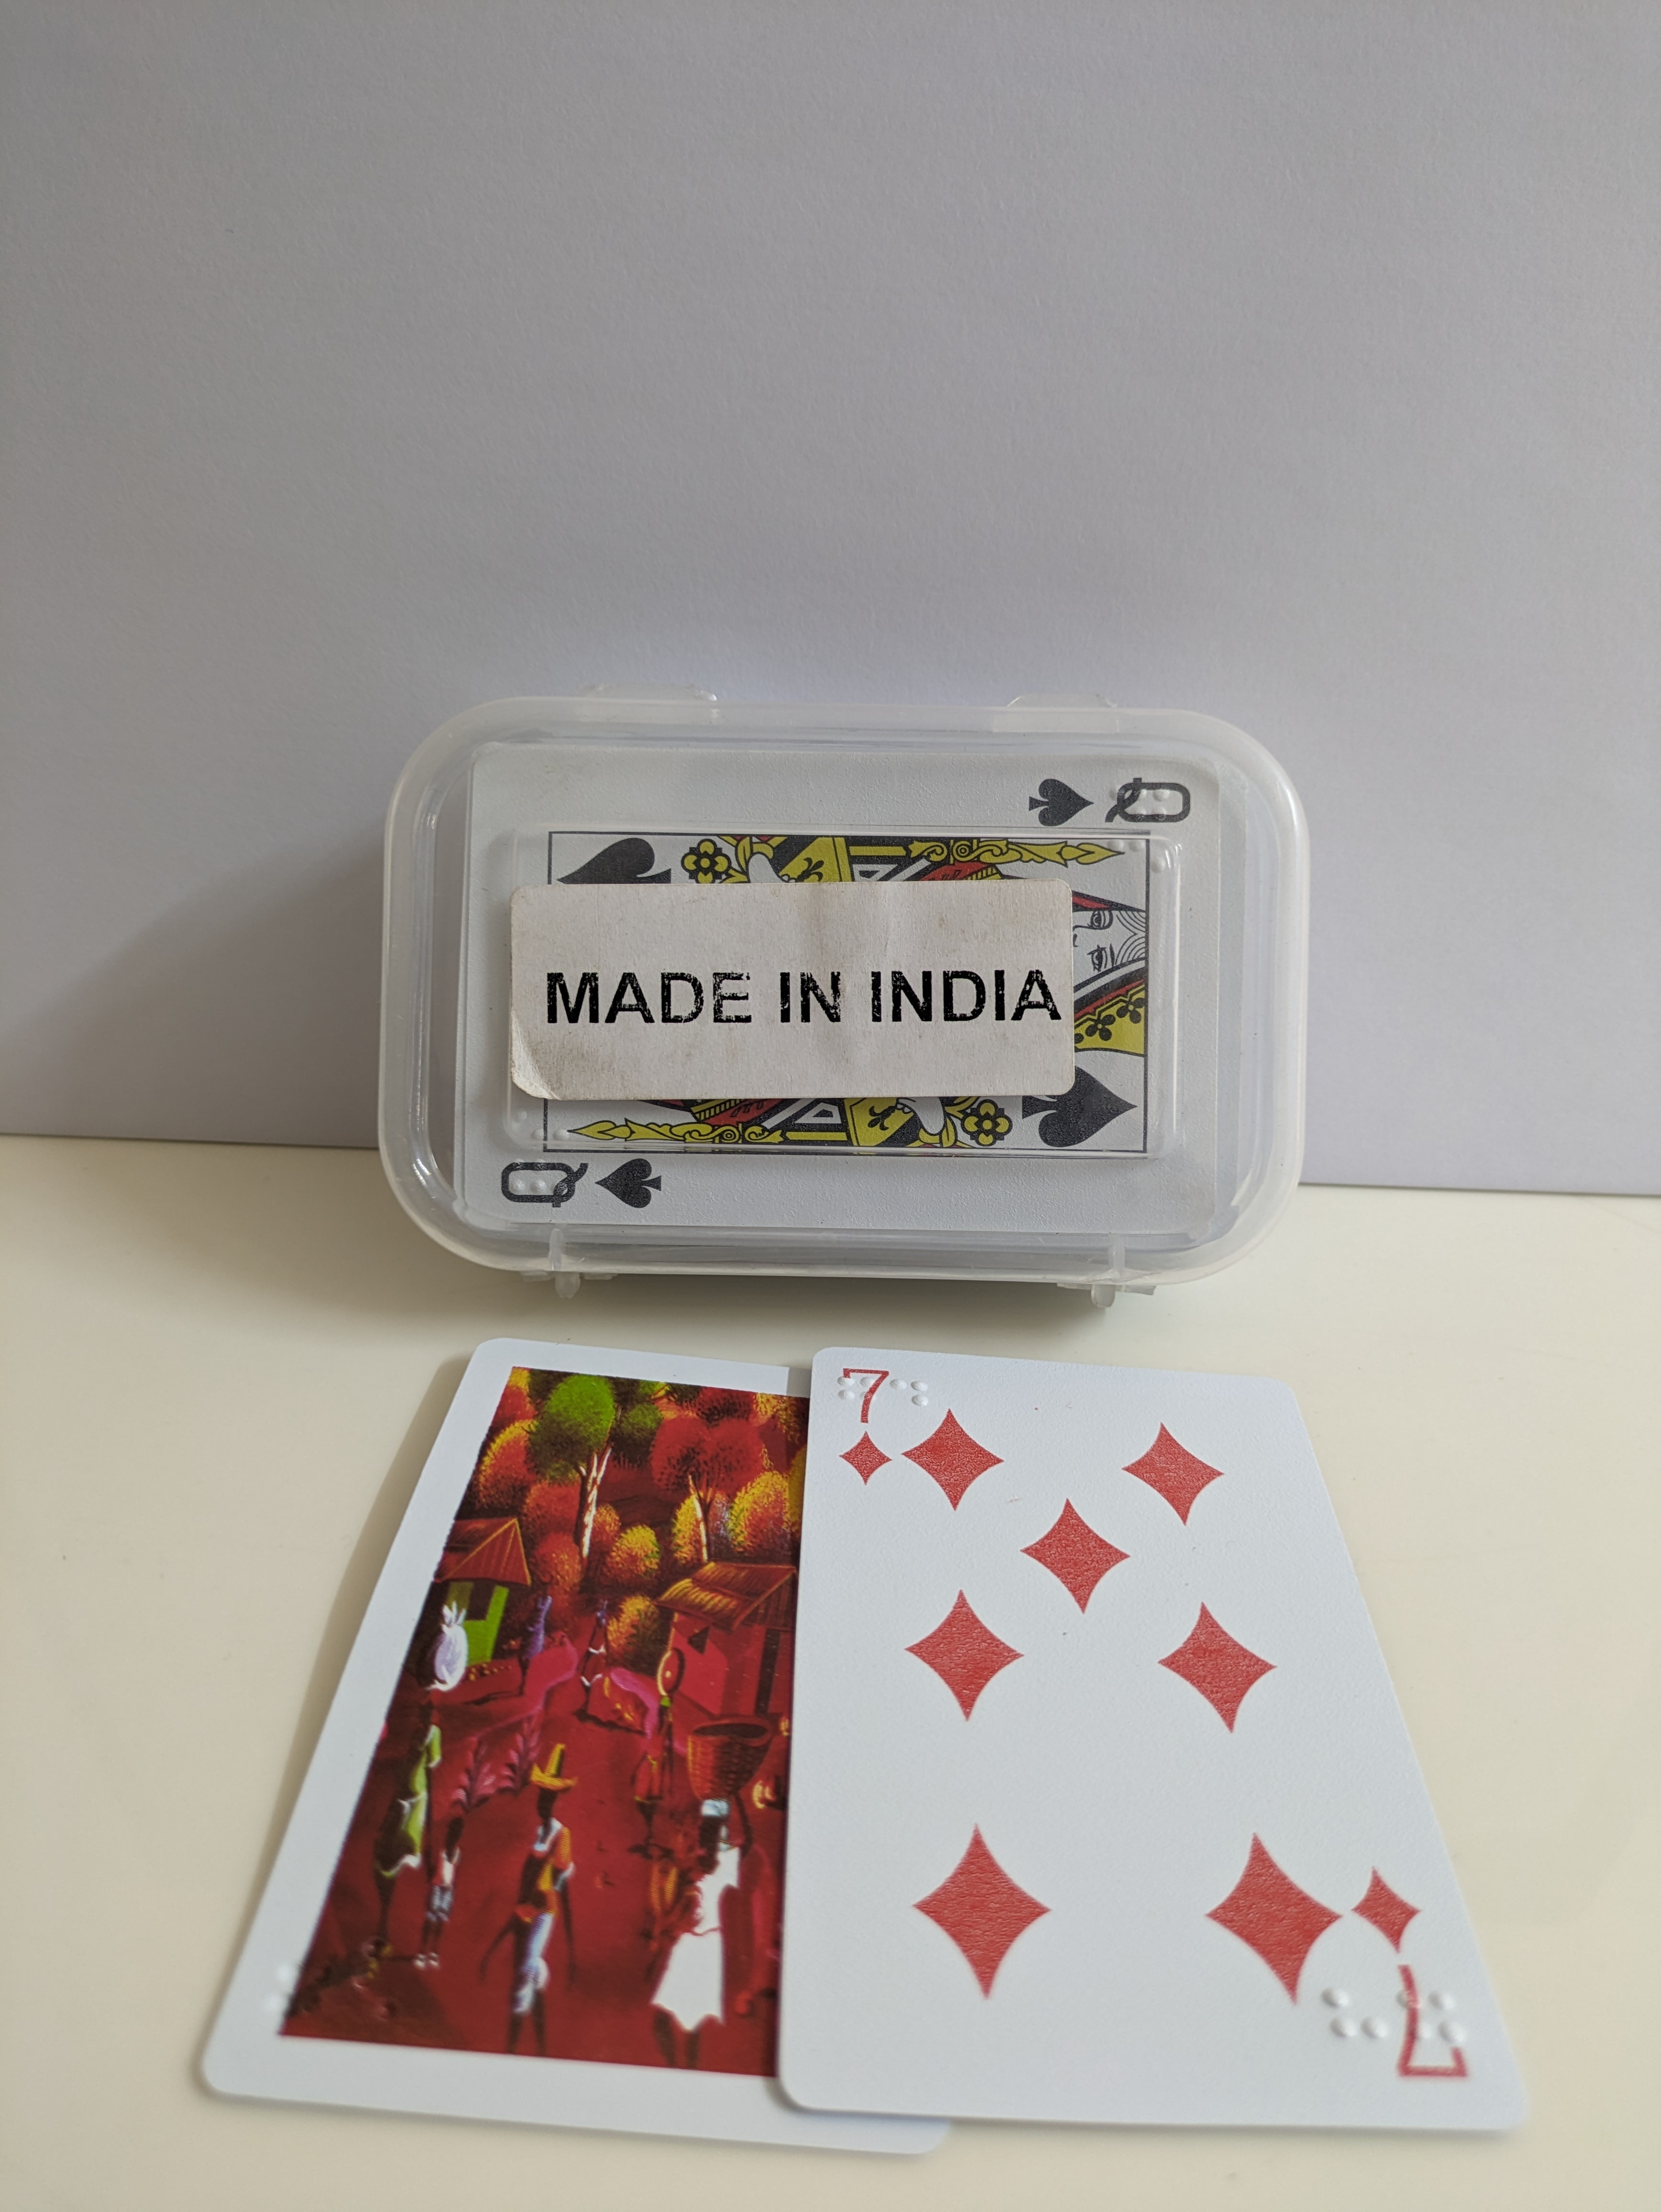 A box set of Playing cards with braille